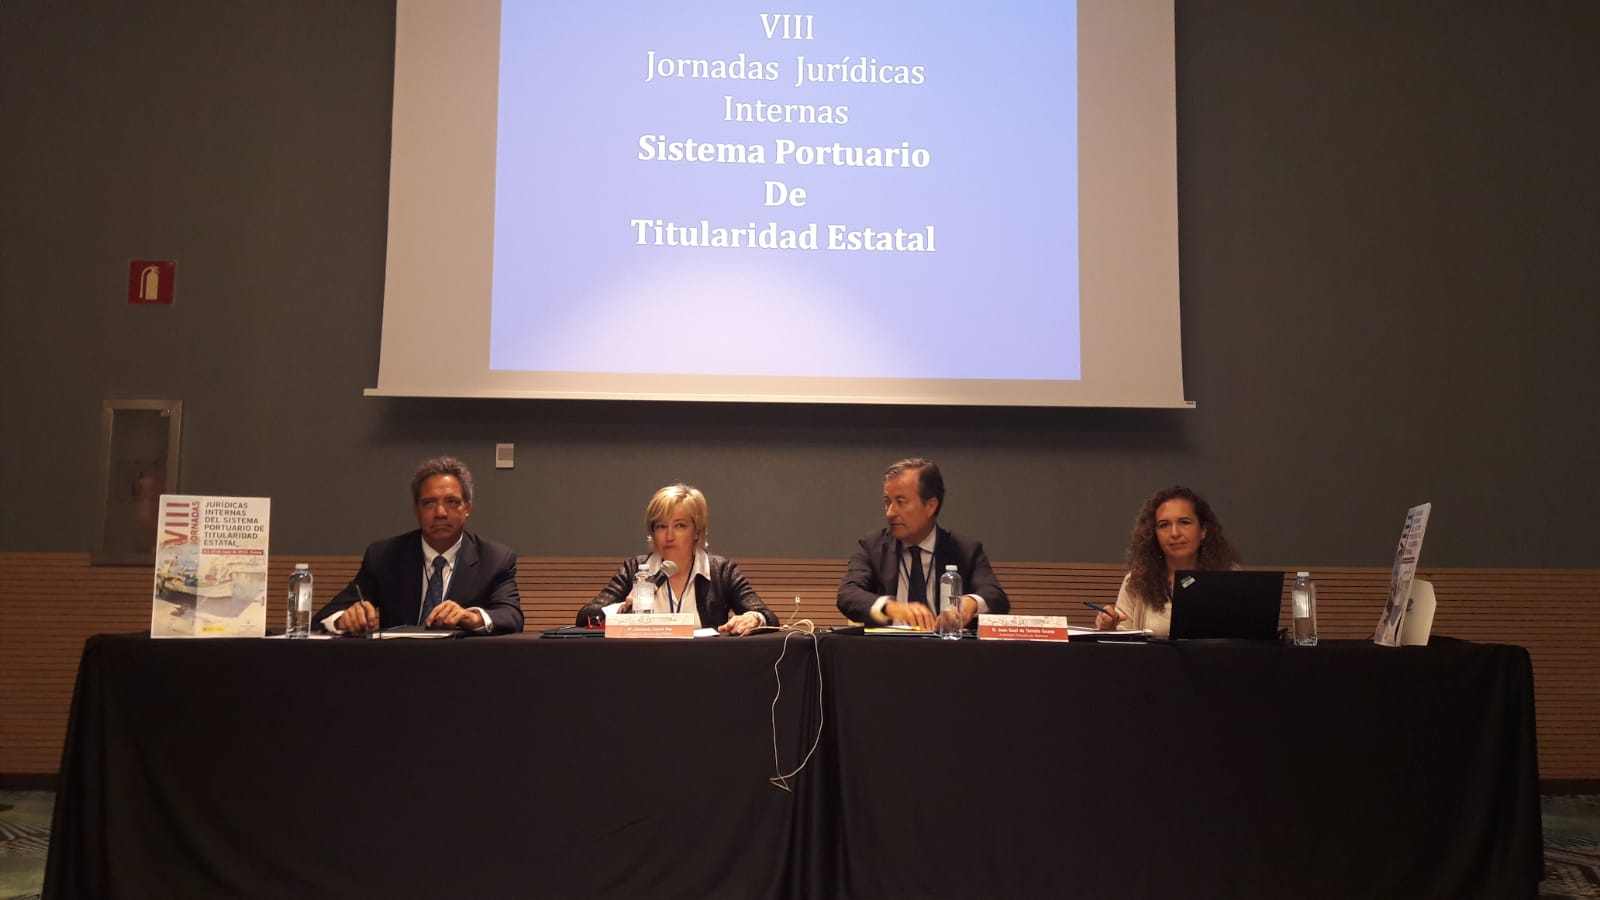 THE APB ORGANISES IN IBIZA THE 8TH INTERNAL LEGAL CONFERENCE ON THE STATE PORTS-OWNED PORT SYSTEM